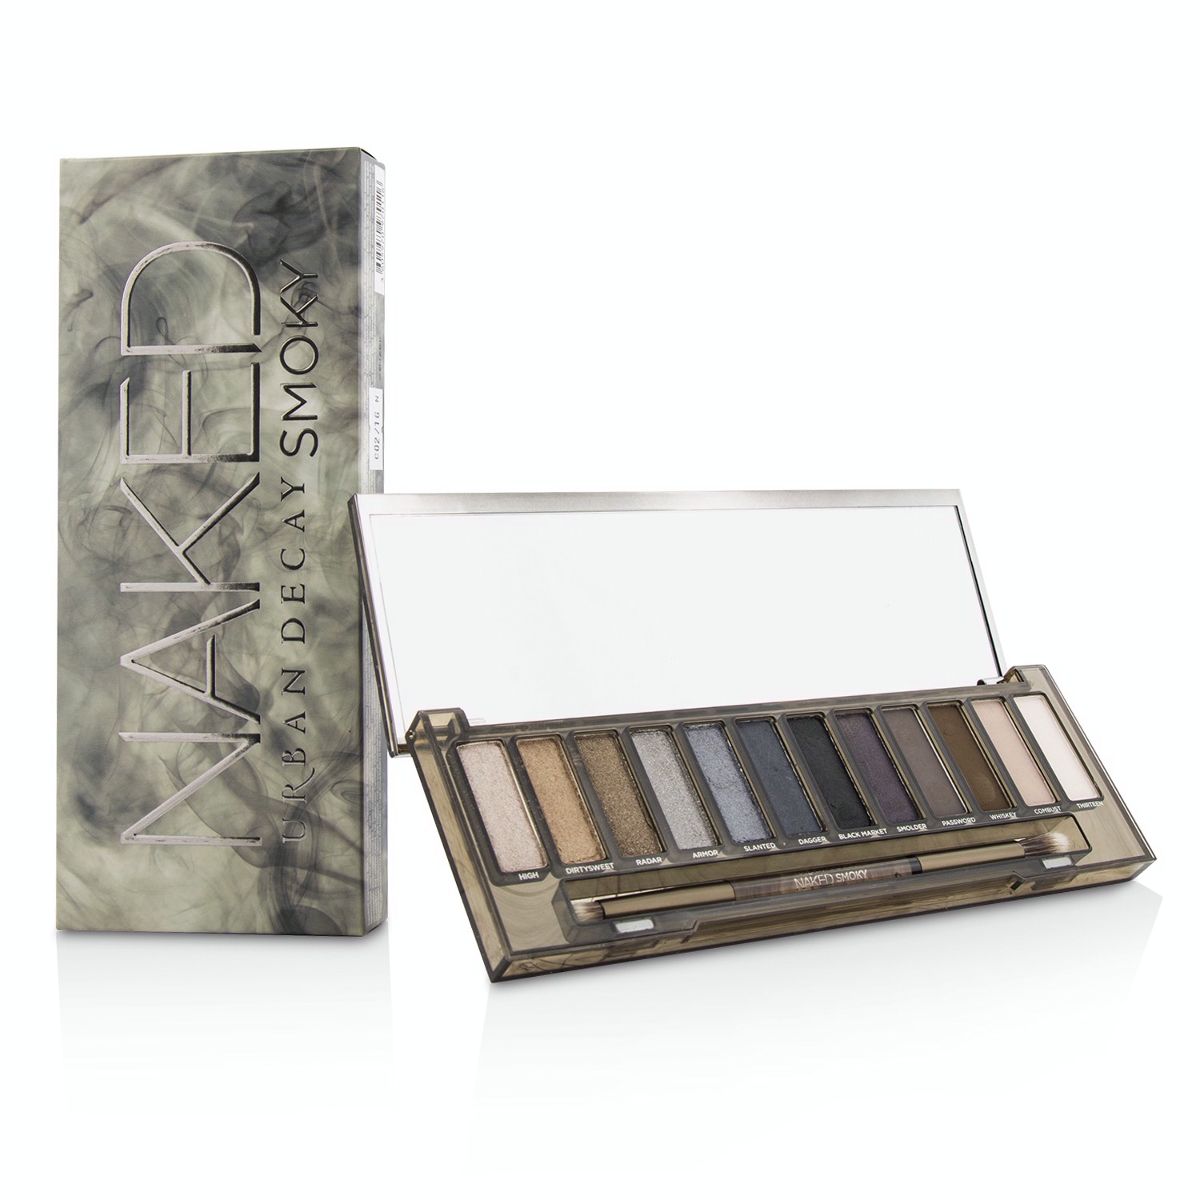 Naked Smoky Eyeshadow Palette (12x Eyeshadow 1x Doubled Ended Smoky Smudger/Tapered Crease Brush) Urban Decay Image